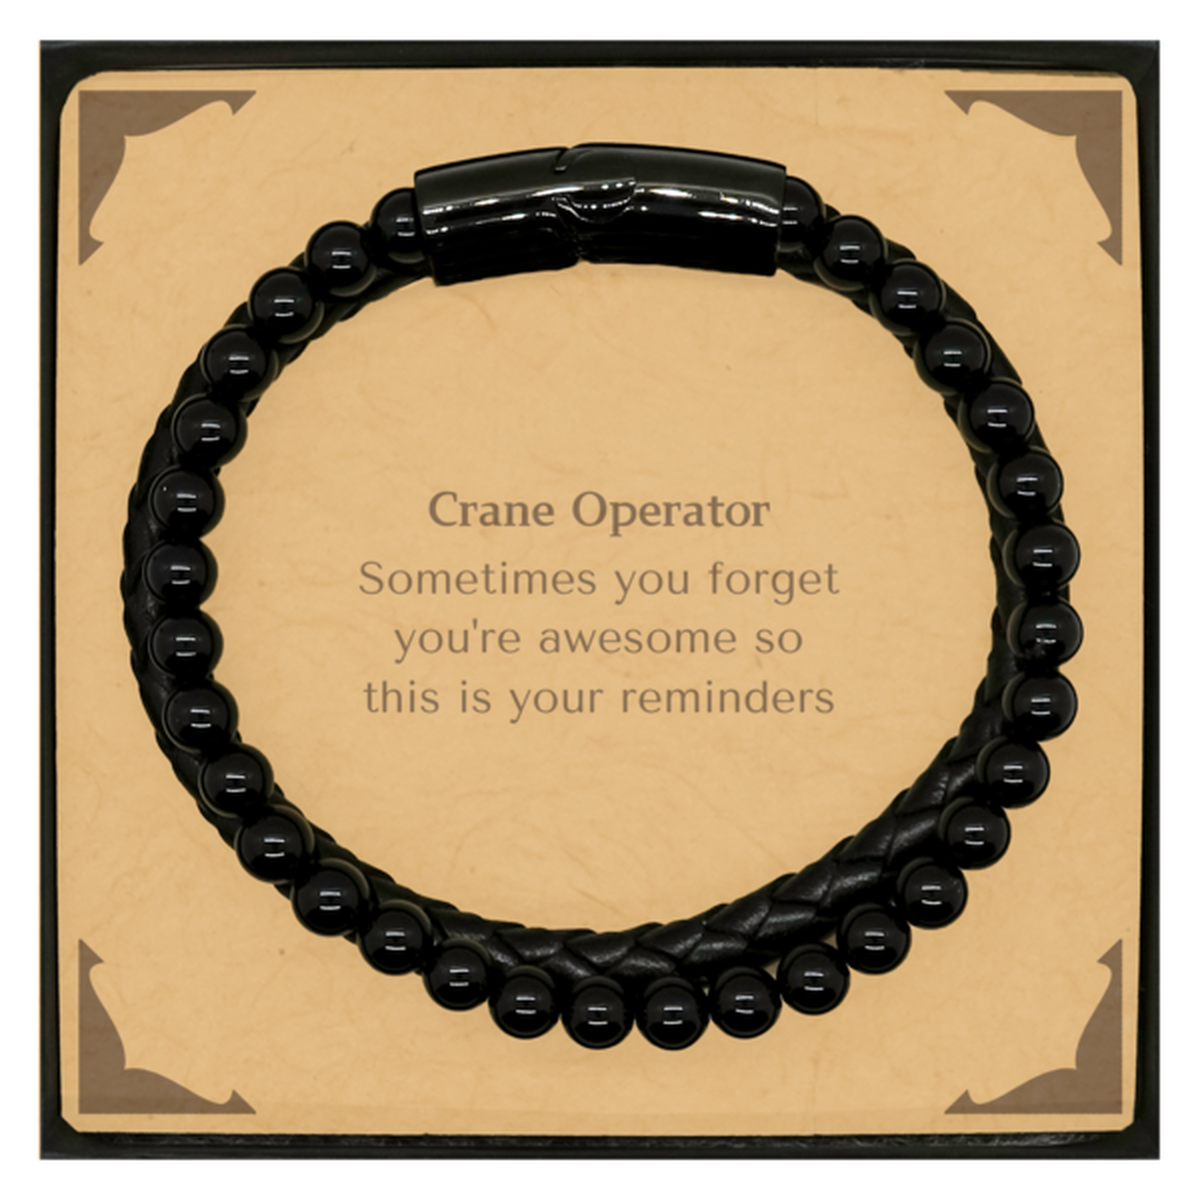 Sentimental Crane Operator Stone Leather Bracelets, Crane Operator Sometimes you forget you're awesome so this is your reminders, Graduation Christmas Birthday Gifts for Crane Operator, Men, Women, Coworkers